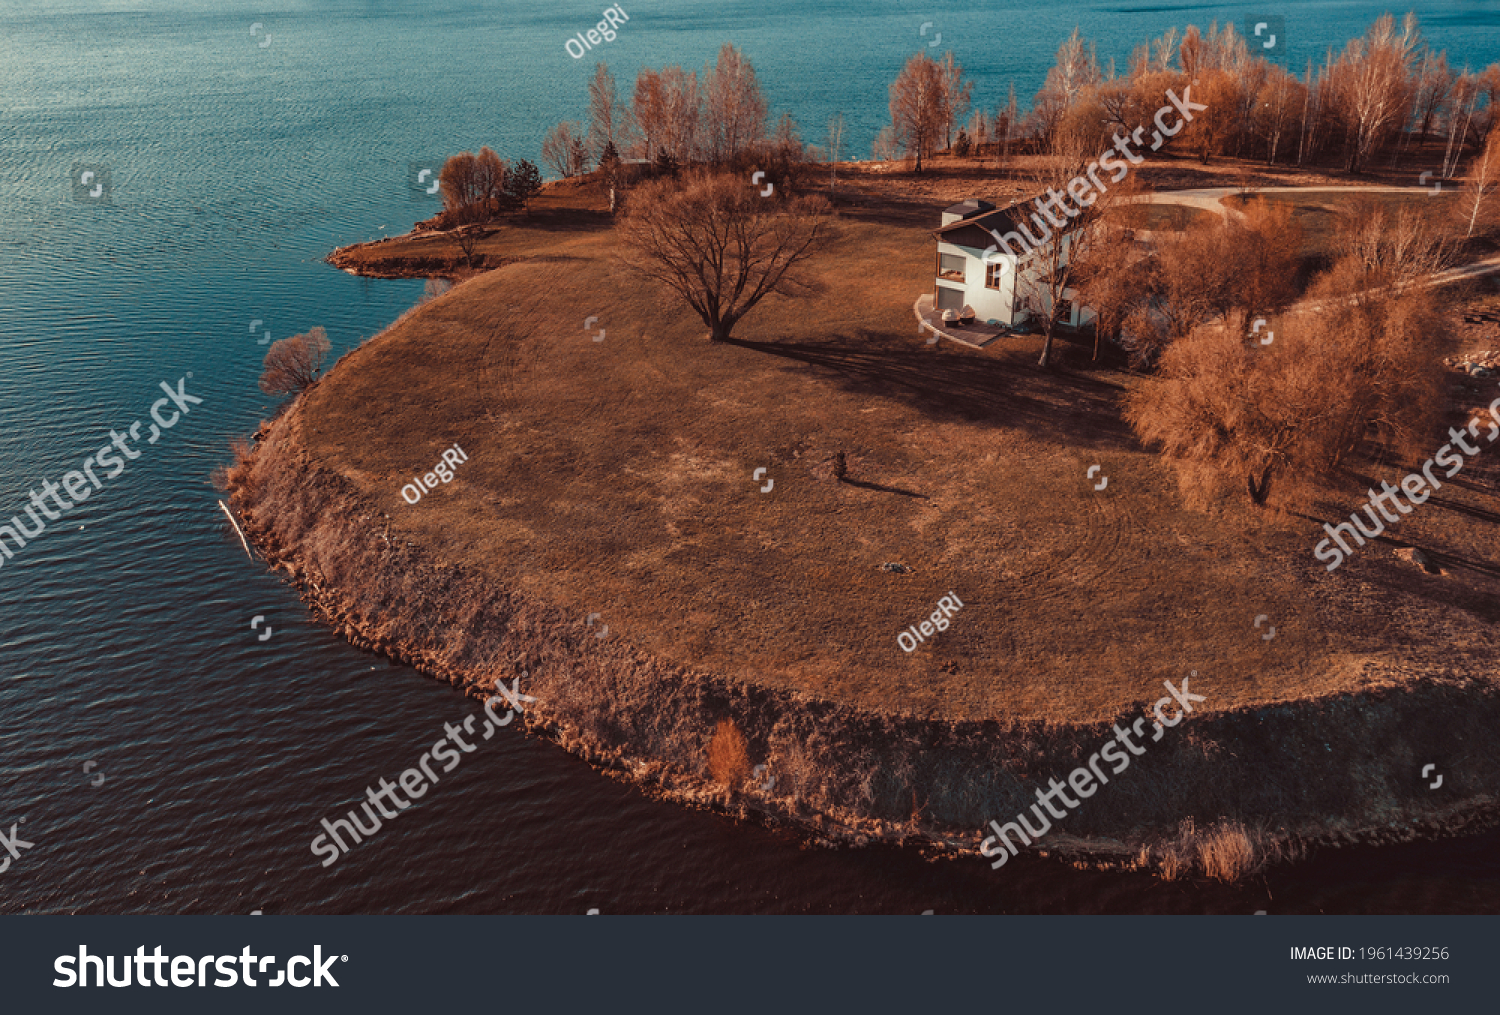 View on red holiday cabin by a lake in Stockholm archipelago, Sweden. Wooden cottage, sauna on shore. Tiny house near the water. Rocky small island, islet in water. Buildings surrounded by green trees #1961439256